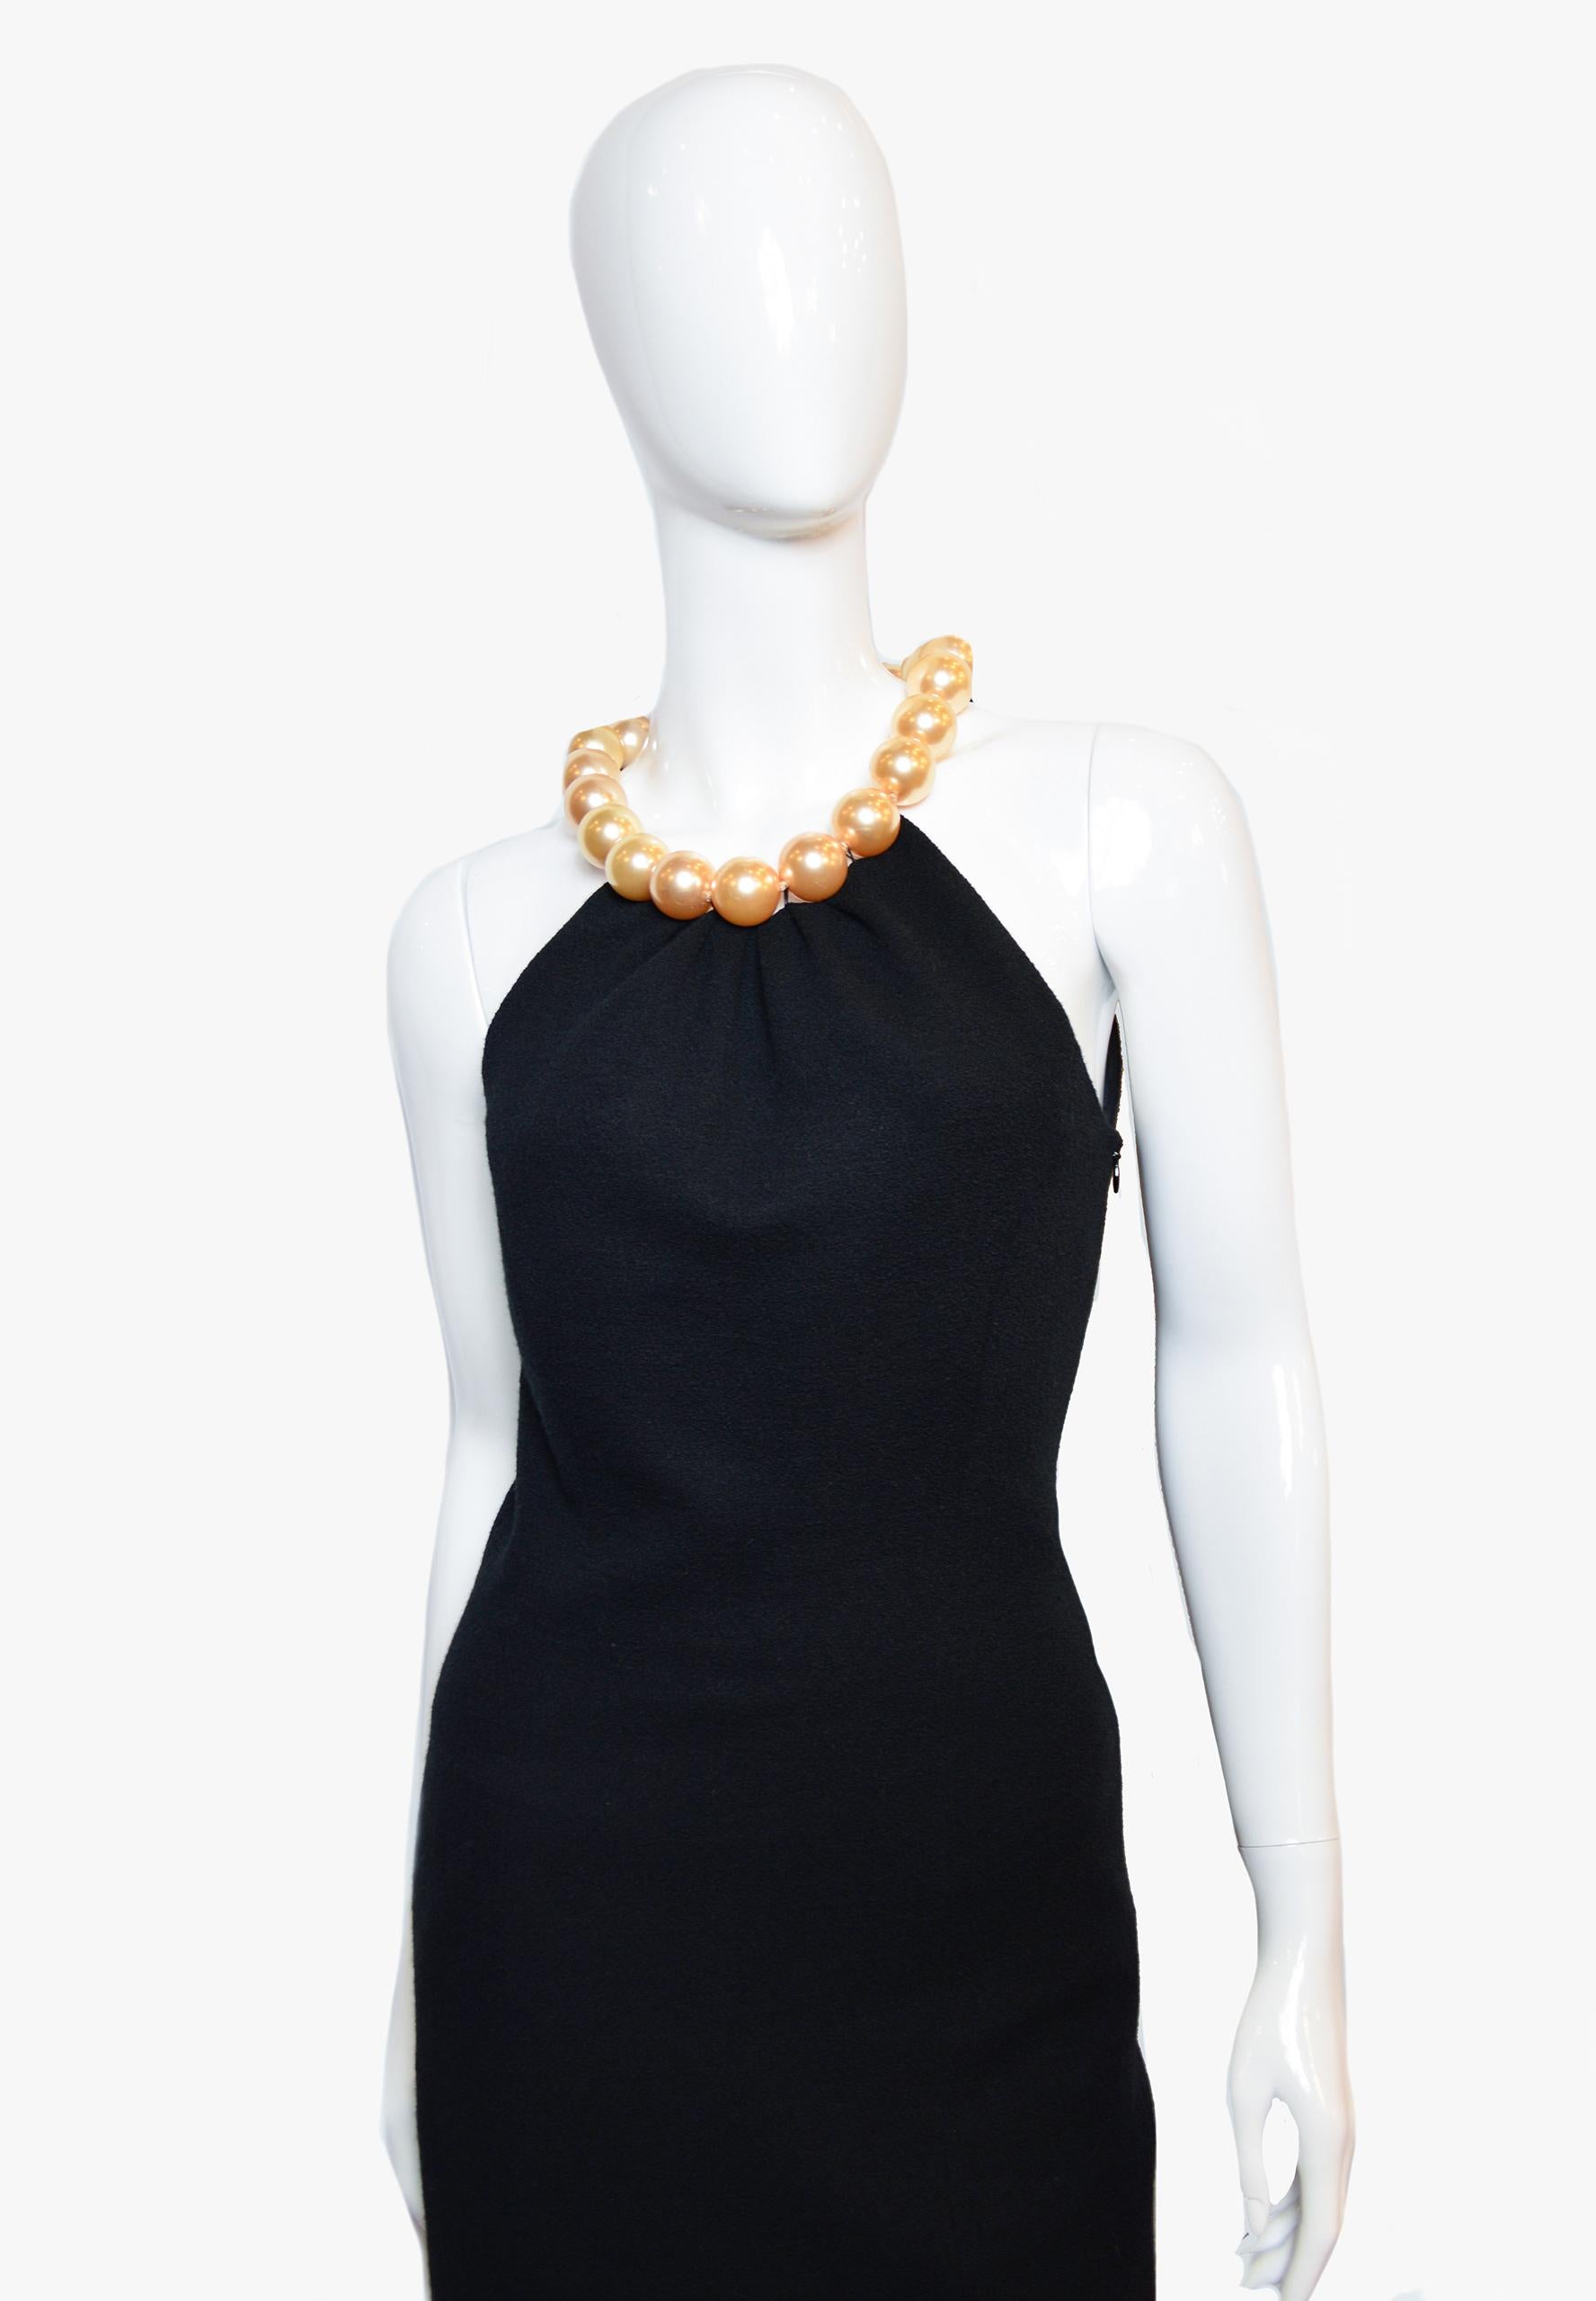 Vintage Moschino dress with a beautiful decoration around the neck made of artificial pearls.
Collection: 2000s
Composition: 52% – wool, 48% – acrylic
Size:
IT 40
US – 6
F – 36
GB – 8
Waist: 70 cm / 27.5 inch
Length: 100 cm / 39.3 inch
Condition: